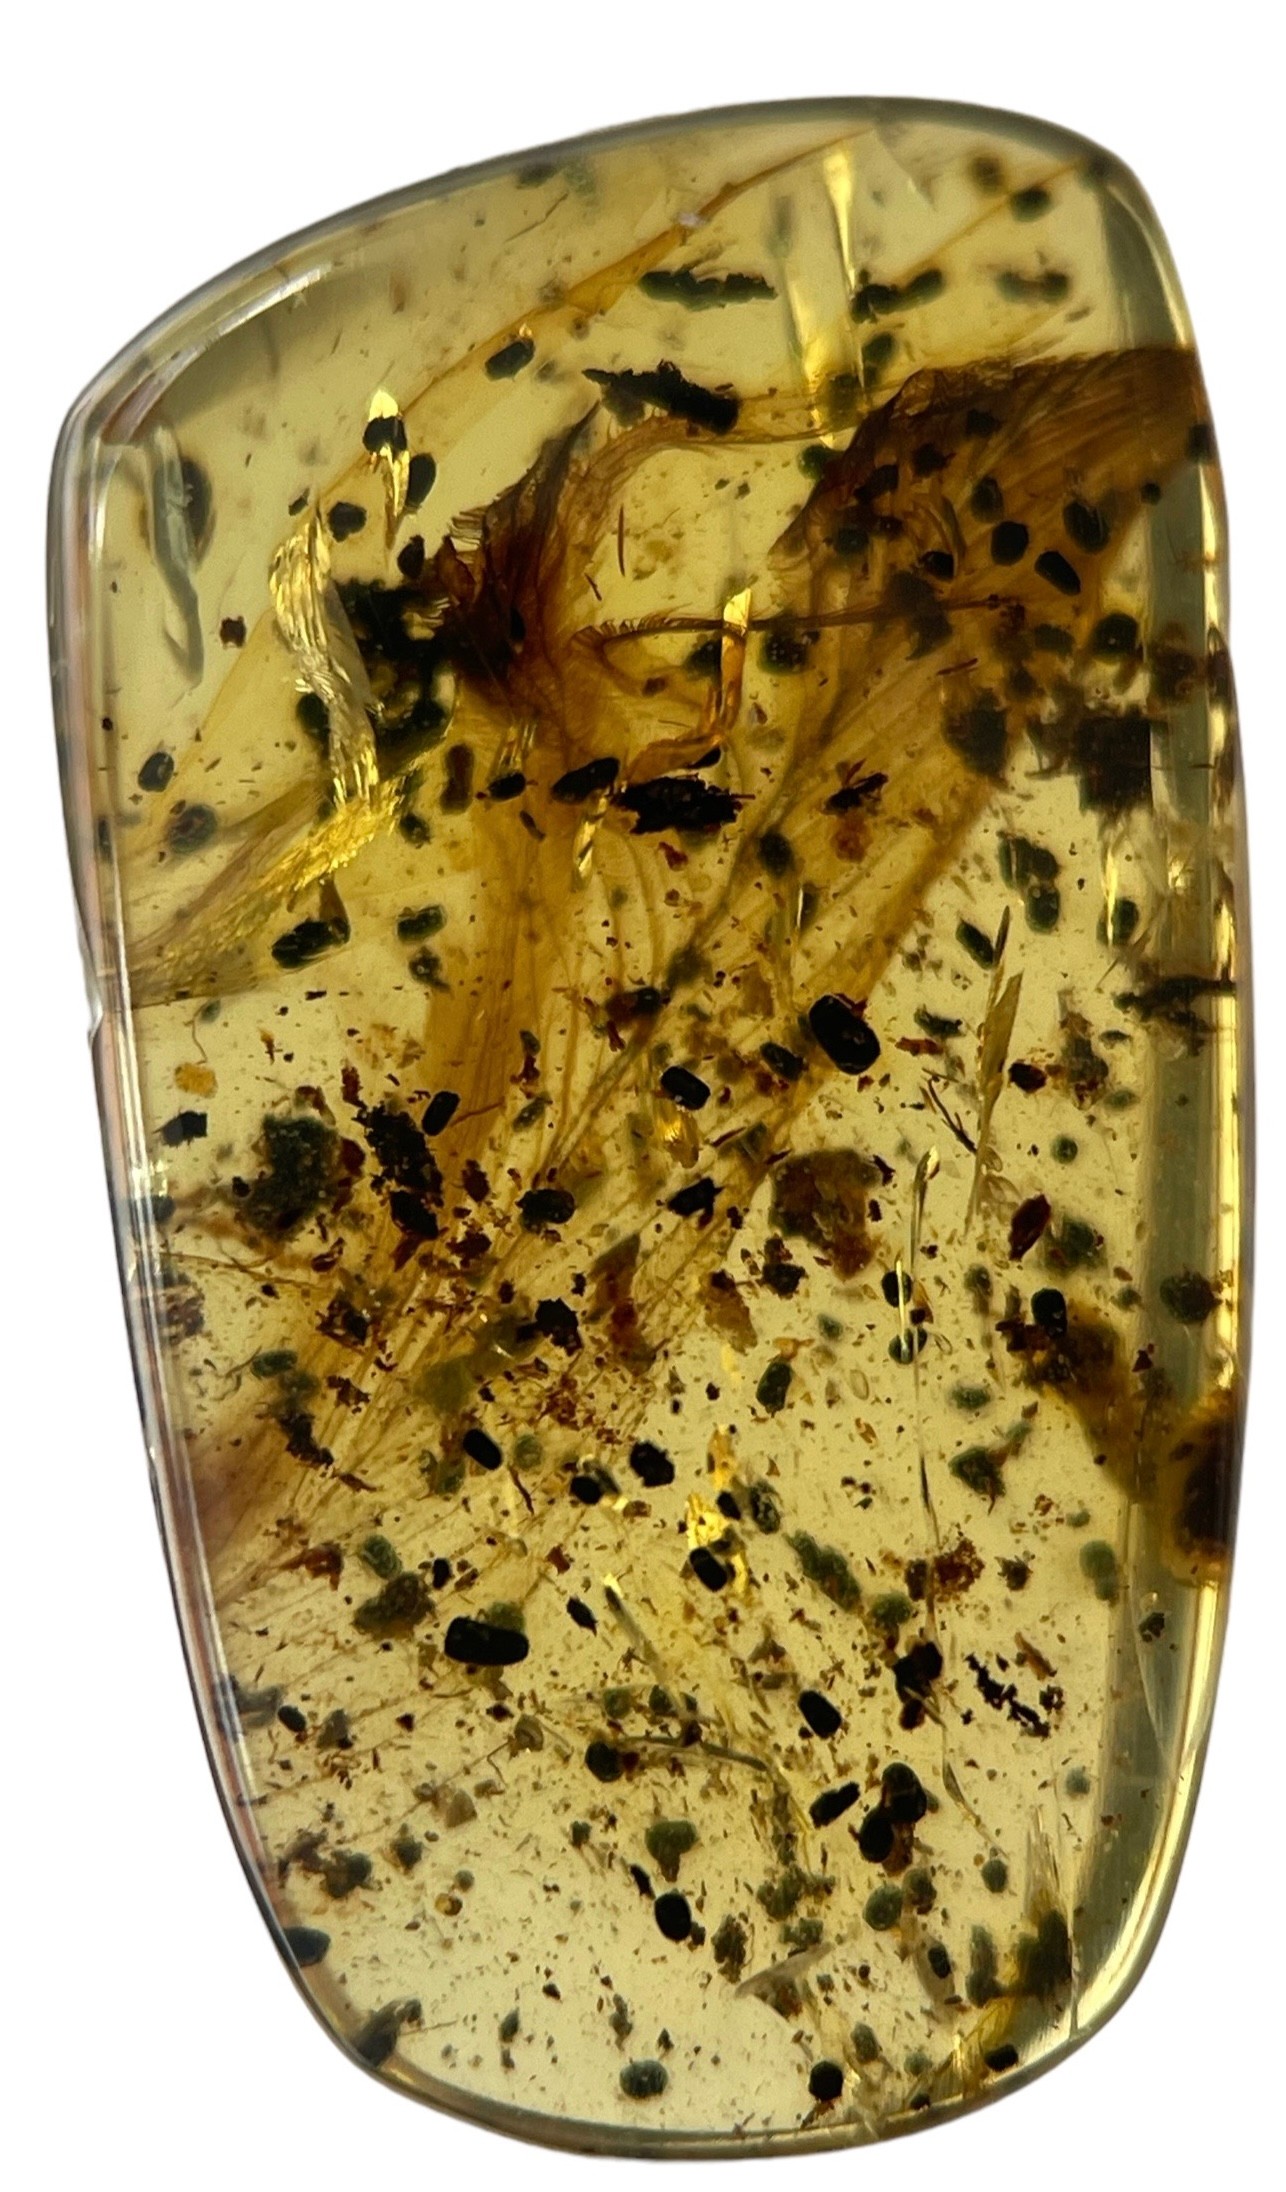 A VERY RARE DINOSAUR FEATHER FOSSIL IN BURMESE AMBER A large and extremely scarce dinosaur feather